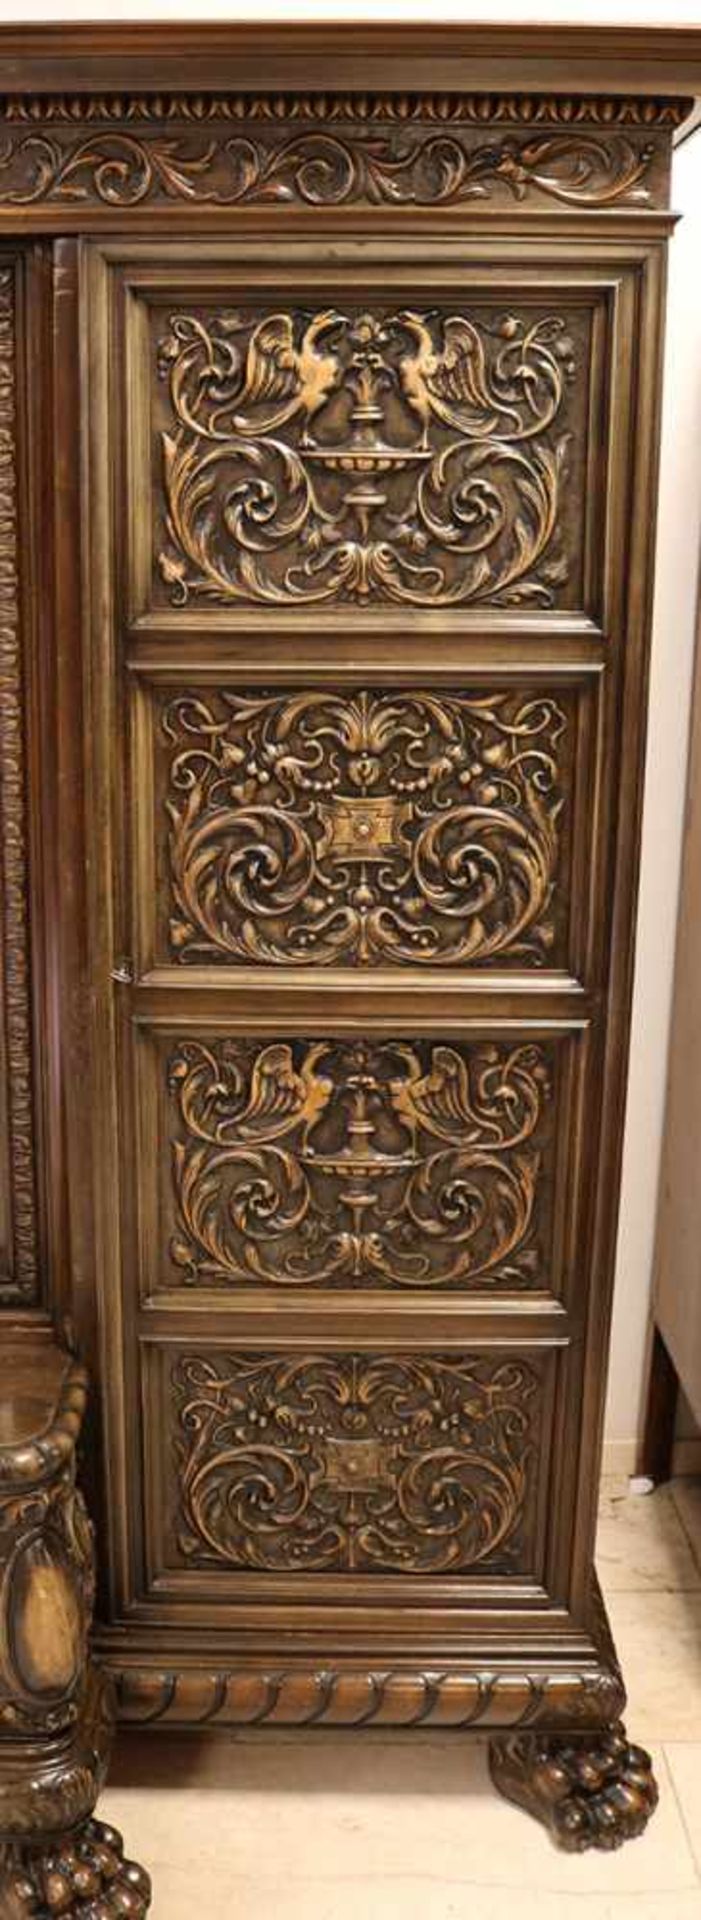 Very large antique walnut Italian Renaissance-style removable display cabinet with two wooden doors, - Image 3 of 3